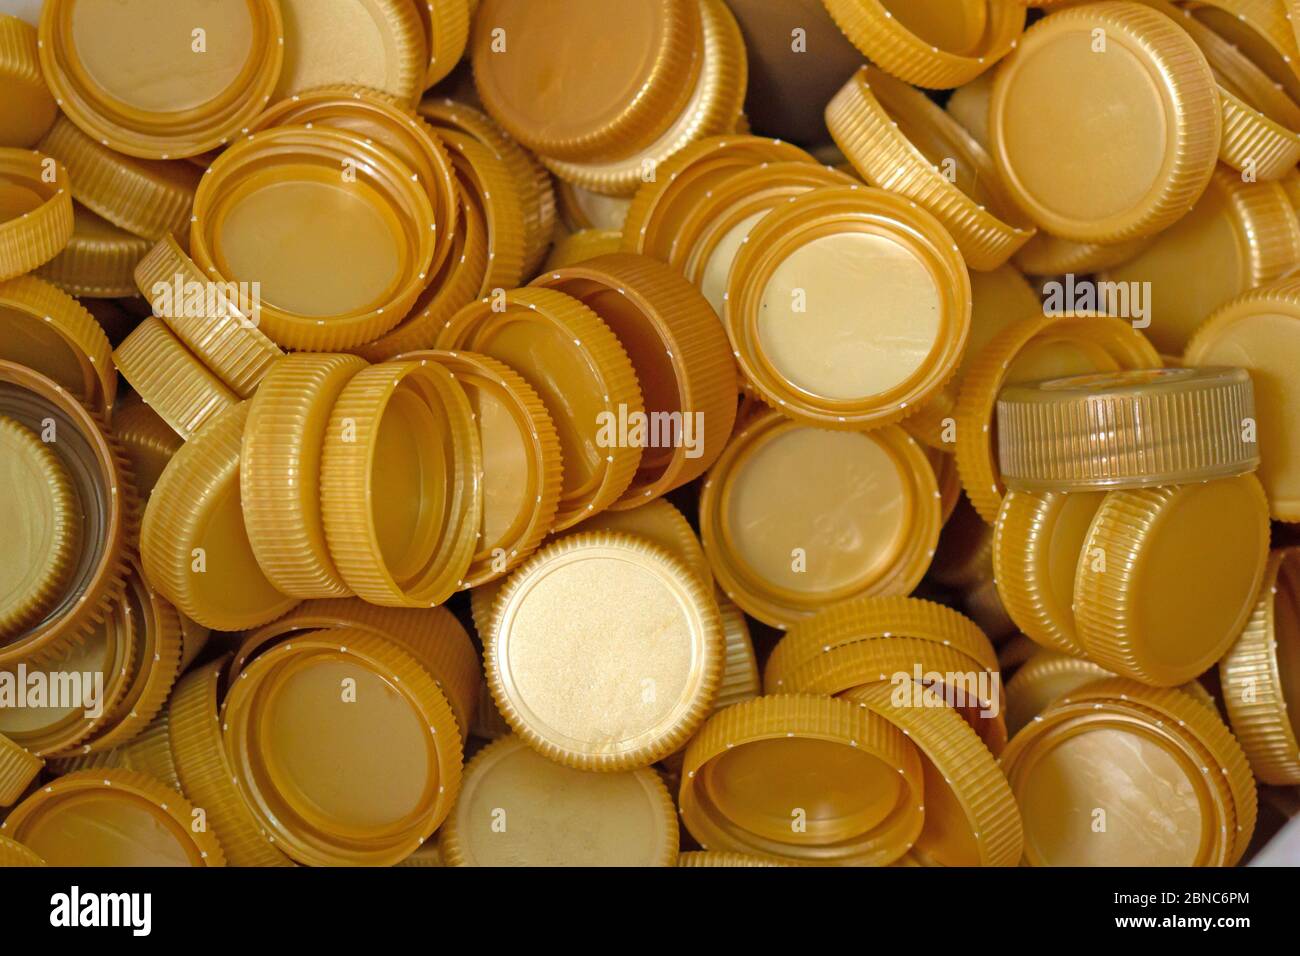 The gold plastic lid that is left over from the bottles are collected to be recycled into other items for reuse. Stock Photo